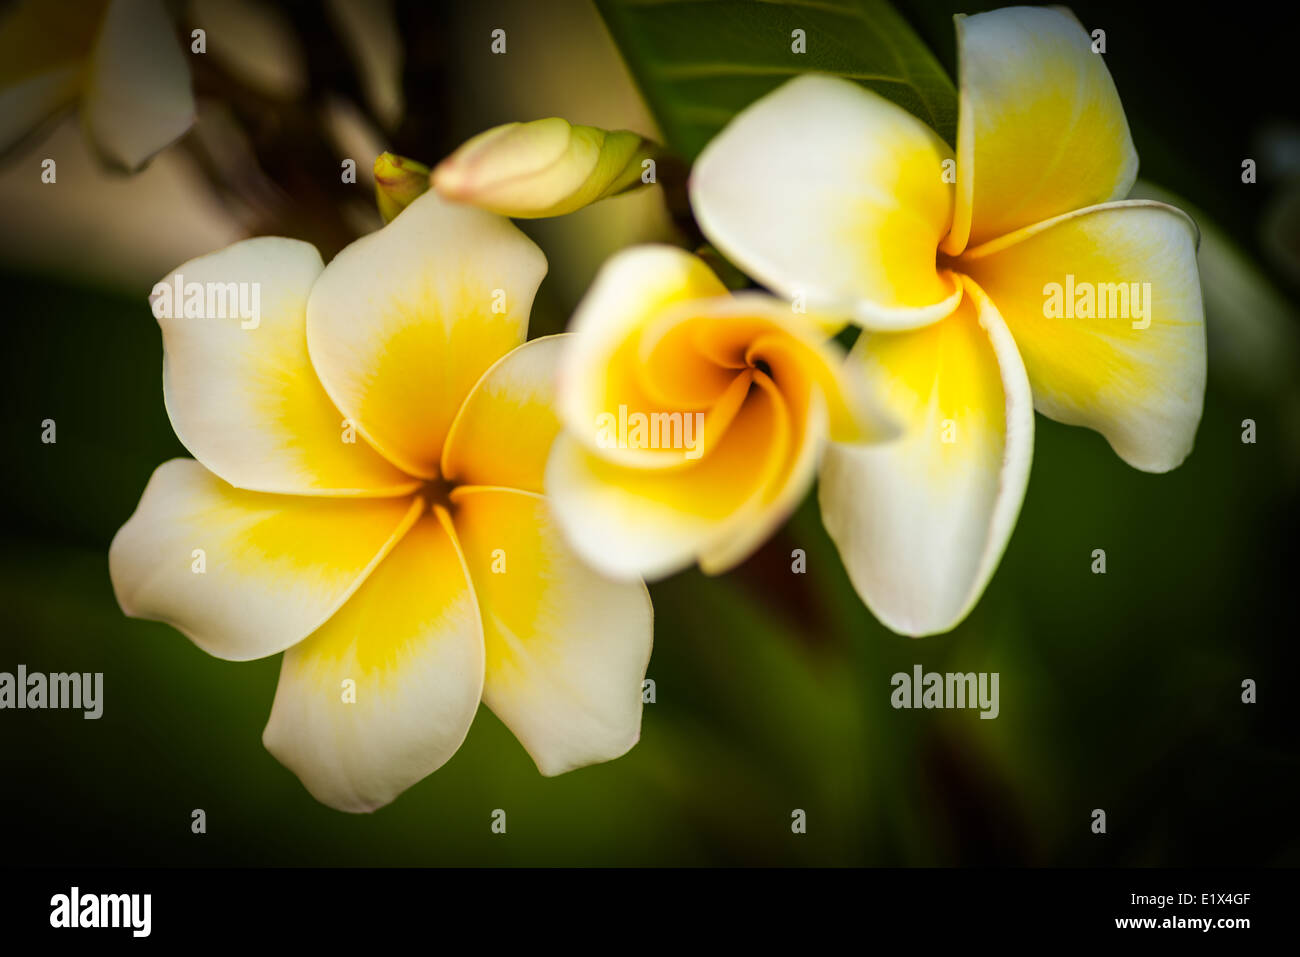 4 petals and 6 petals white plumeria flowers,this is a genetic variation,the vast majority of frangipani flowers are five petals Stock Photo